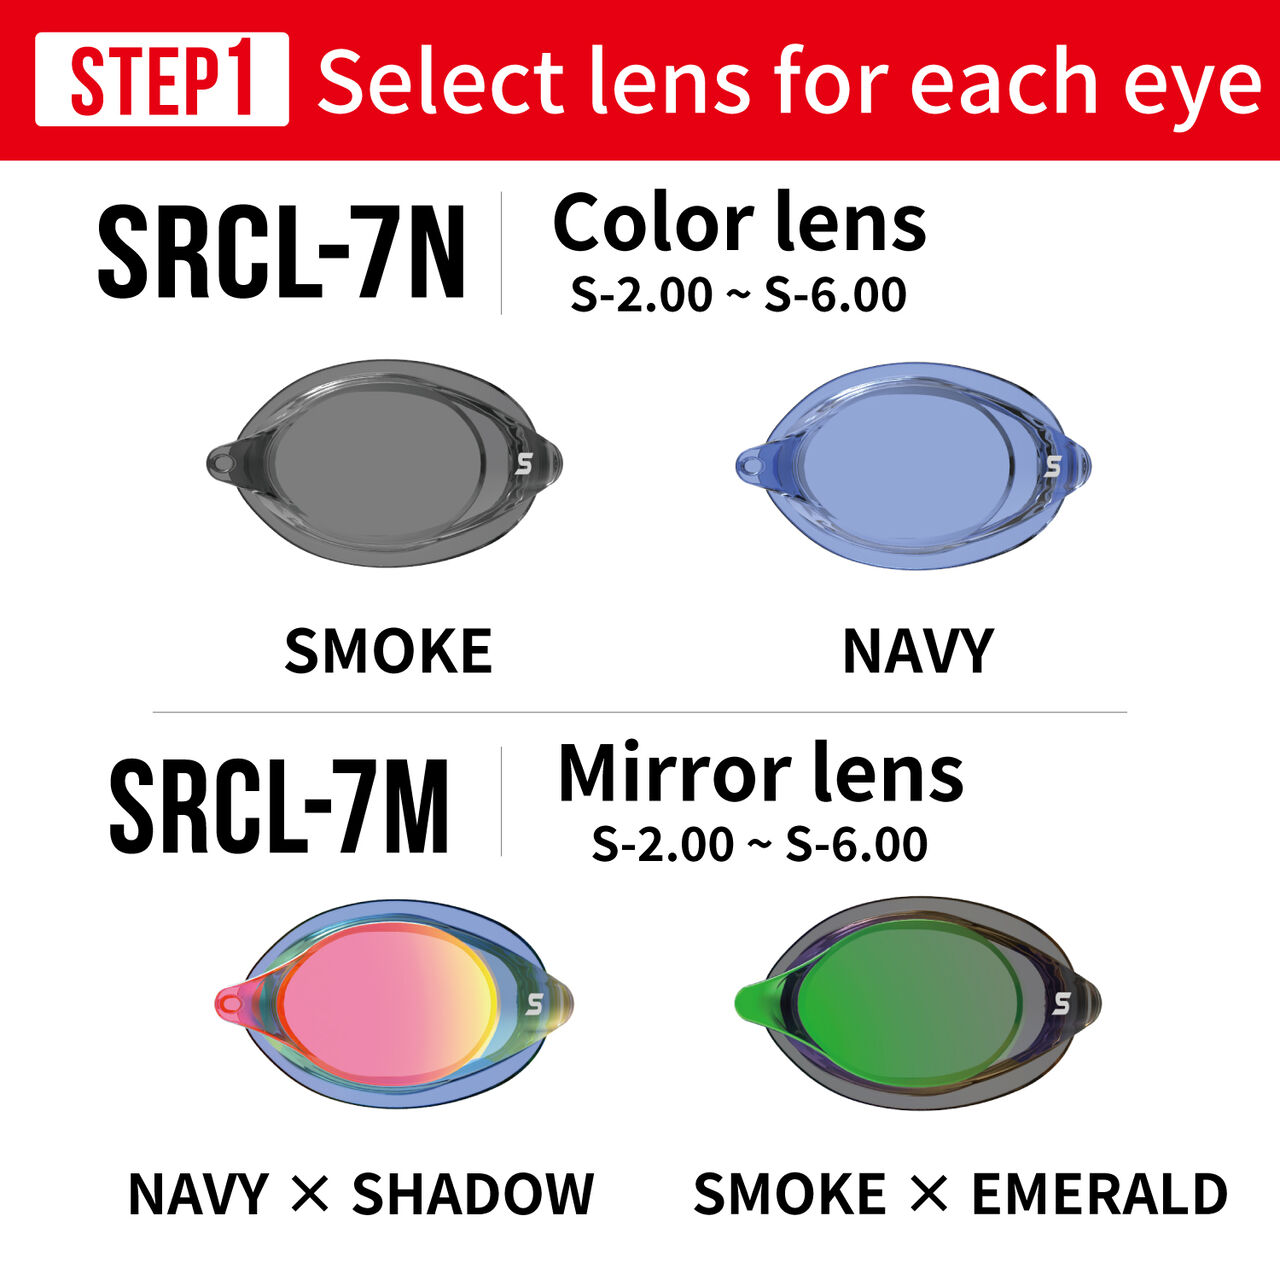 SRCL-7M S-6.00 Navy x Shadow Mirror,Opt1, large image number 1